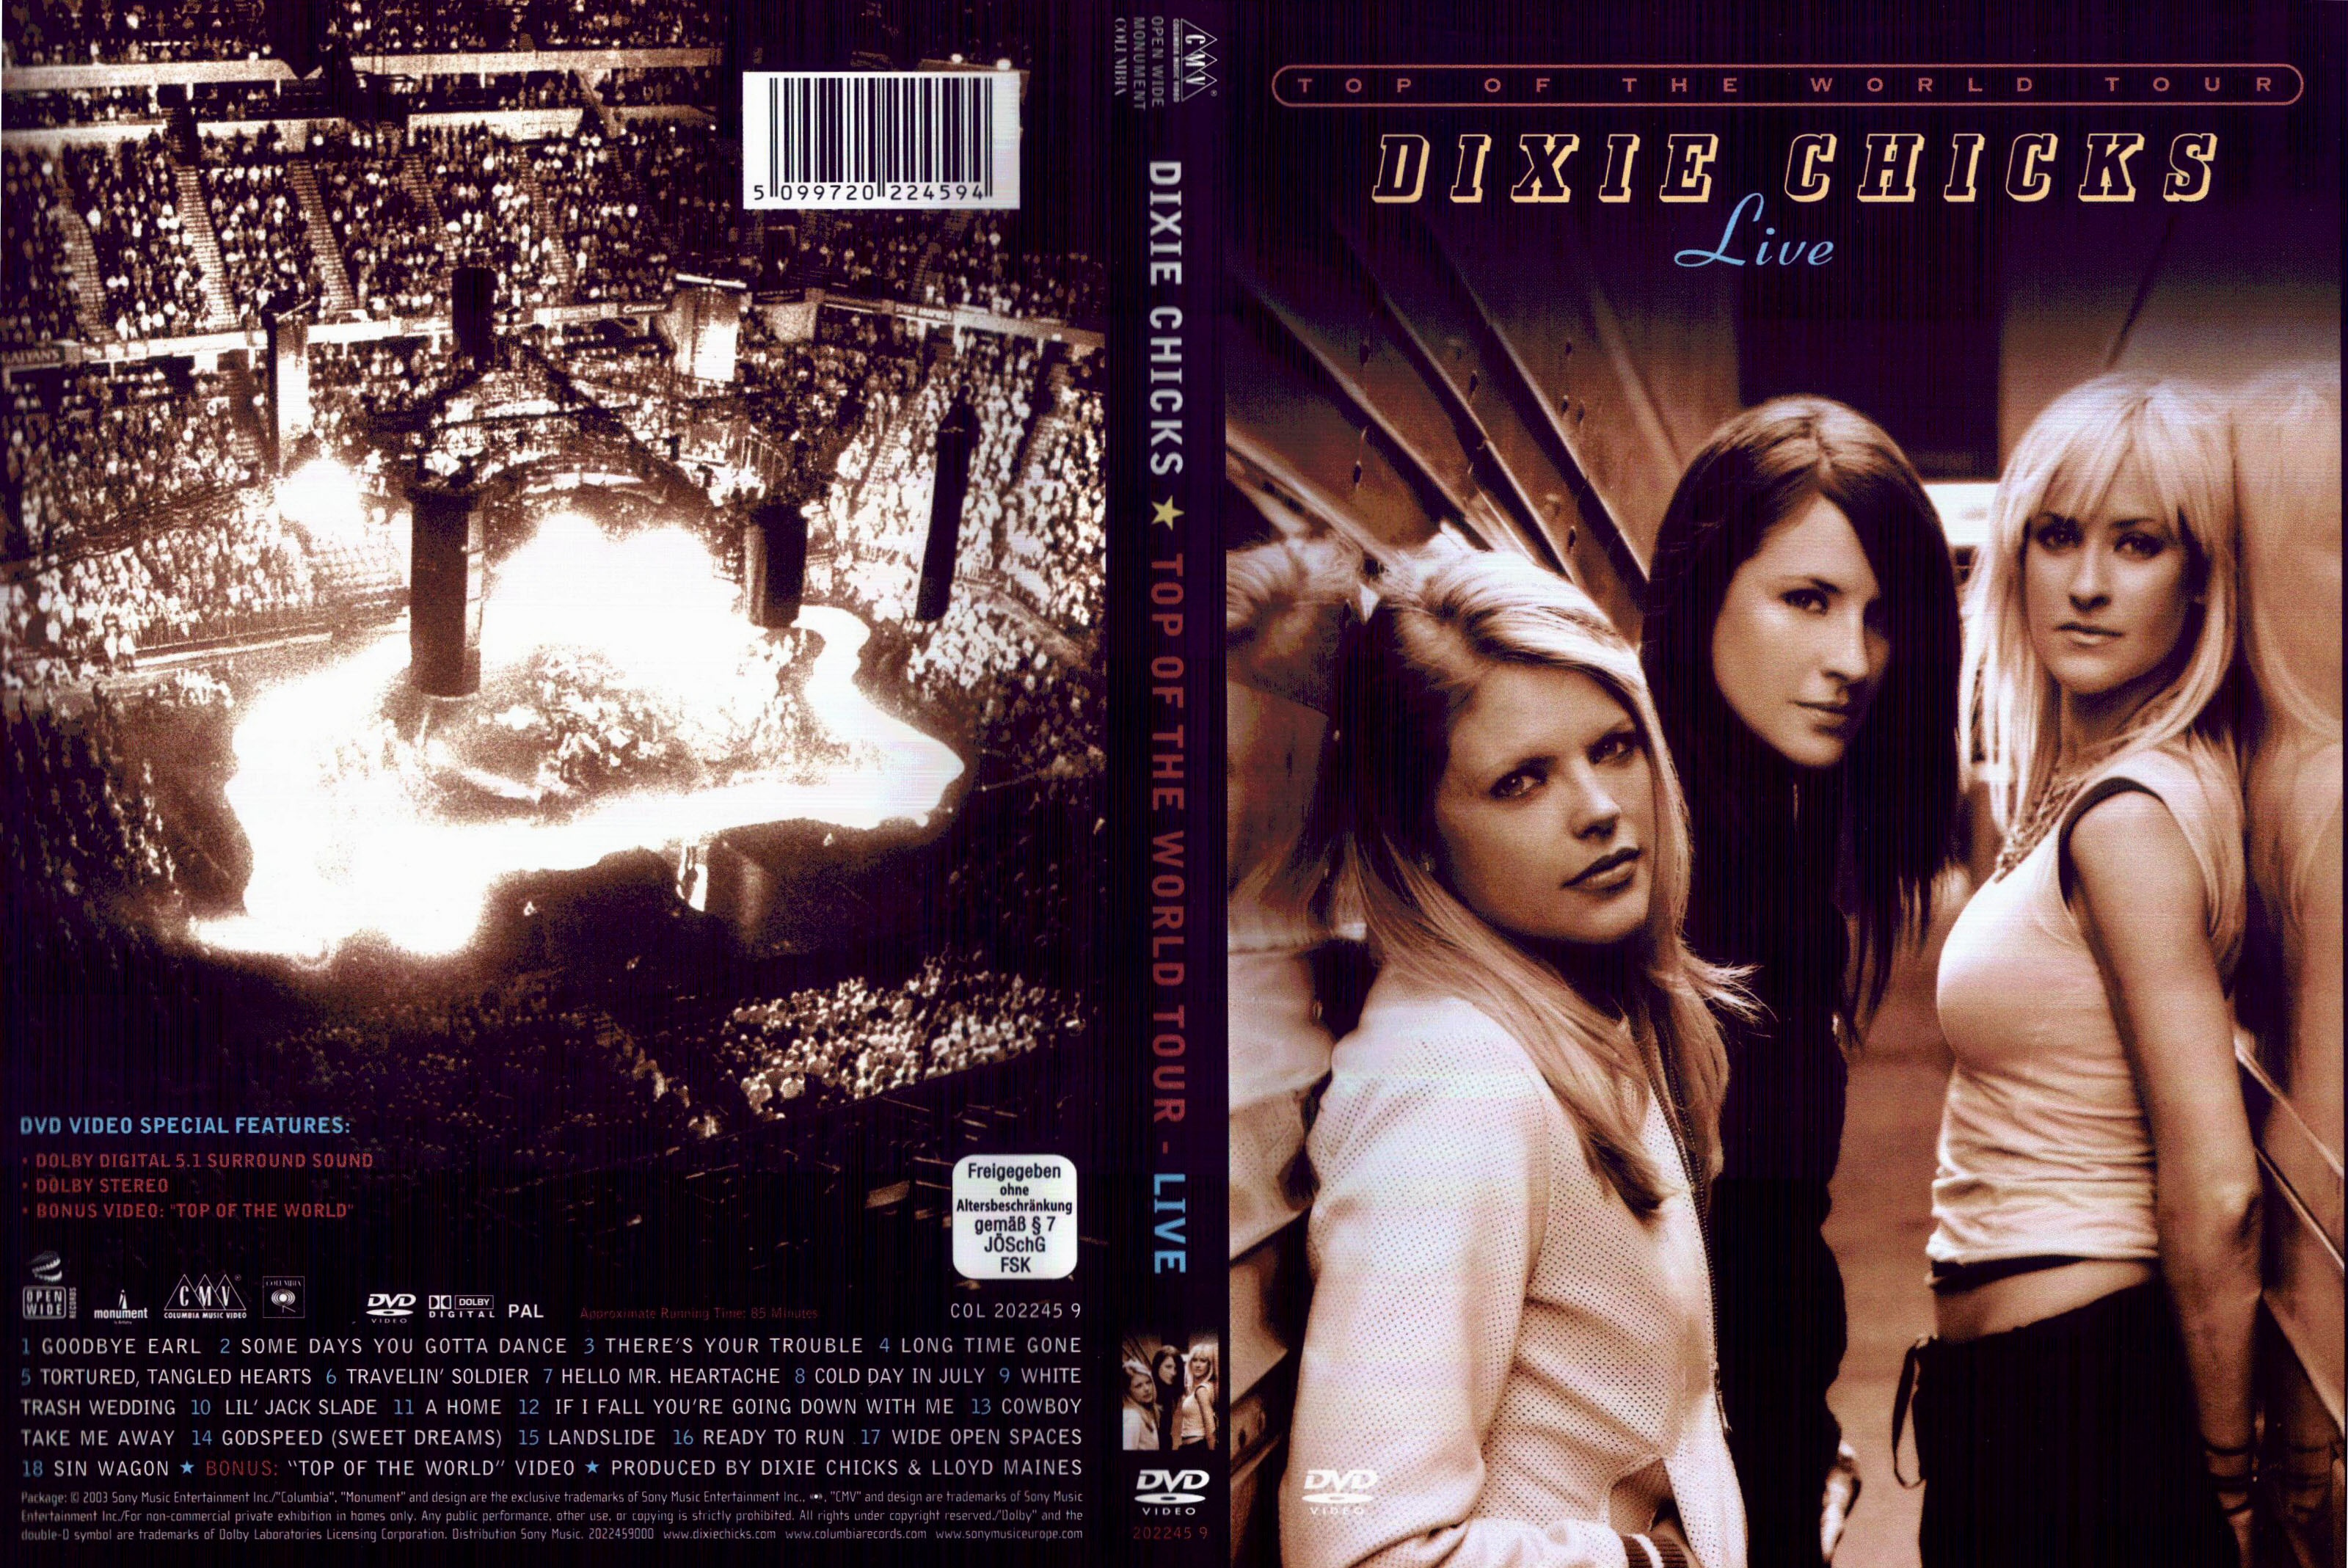 top of the world tour live dixie chicks england